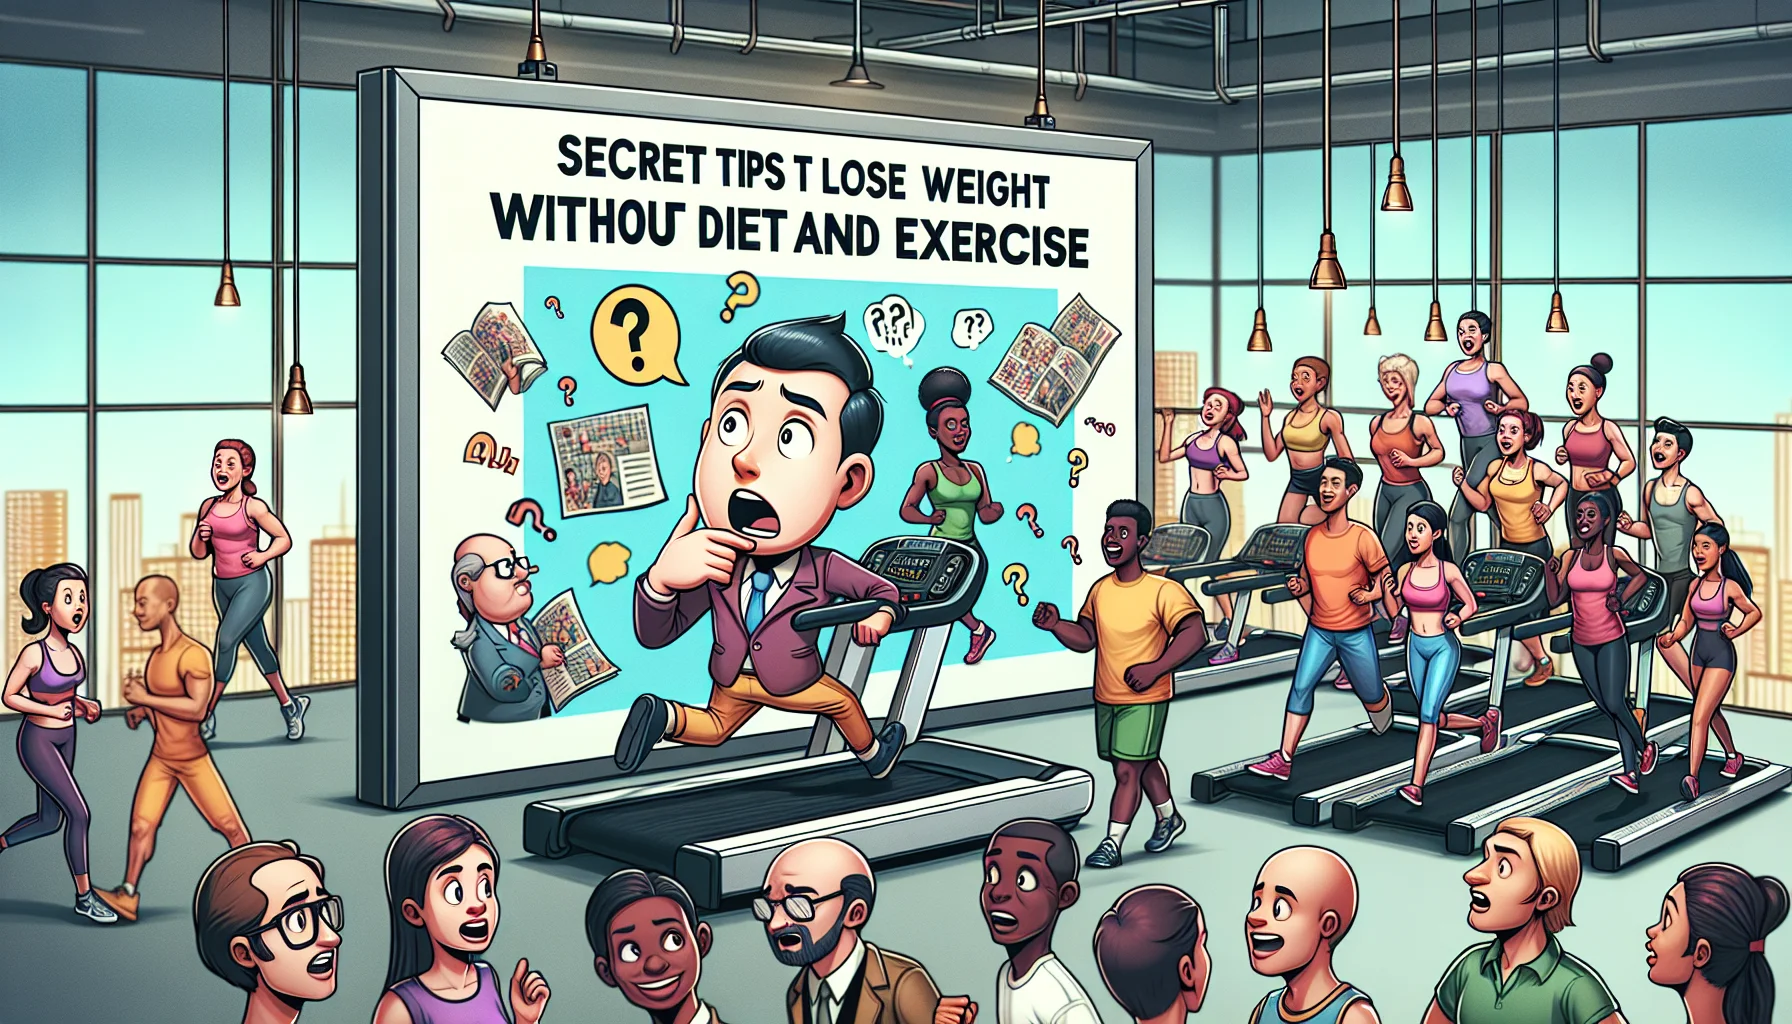 Generate a humorous and realistic image showcasing a visual guide named 'Secret Tips to Lose Weight Without Diet and Exercise.' It should creatively imply the benefits of incorporating exercise and healthy habits in our daily routine. The scene could include a puzzled cartoon character looking at the guide while running on a treadmill at a gym, surrounded by people of various ages, genders, and descents such as Caucasian, Black, Hispanic, South Asian and Middle-Eastern, who are enthusiastically working out and visibly enjoying it.